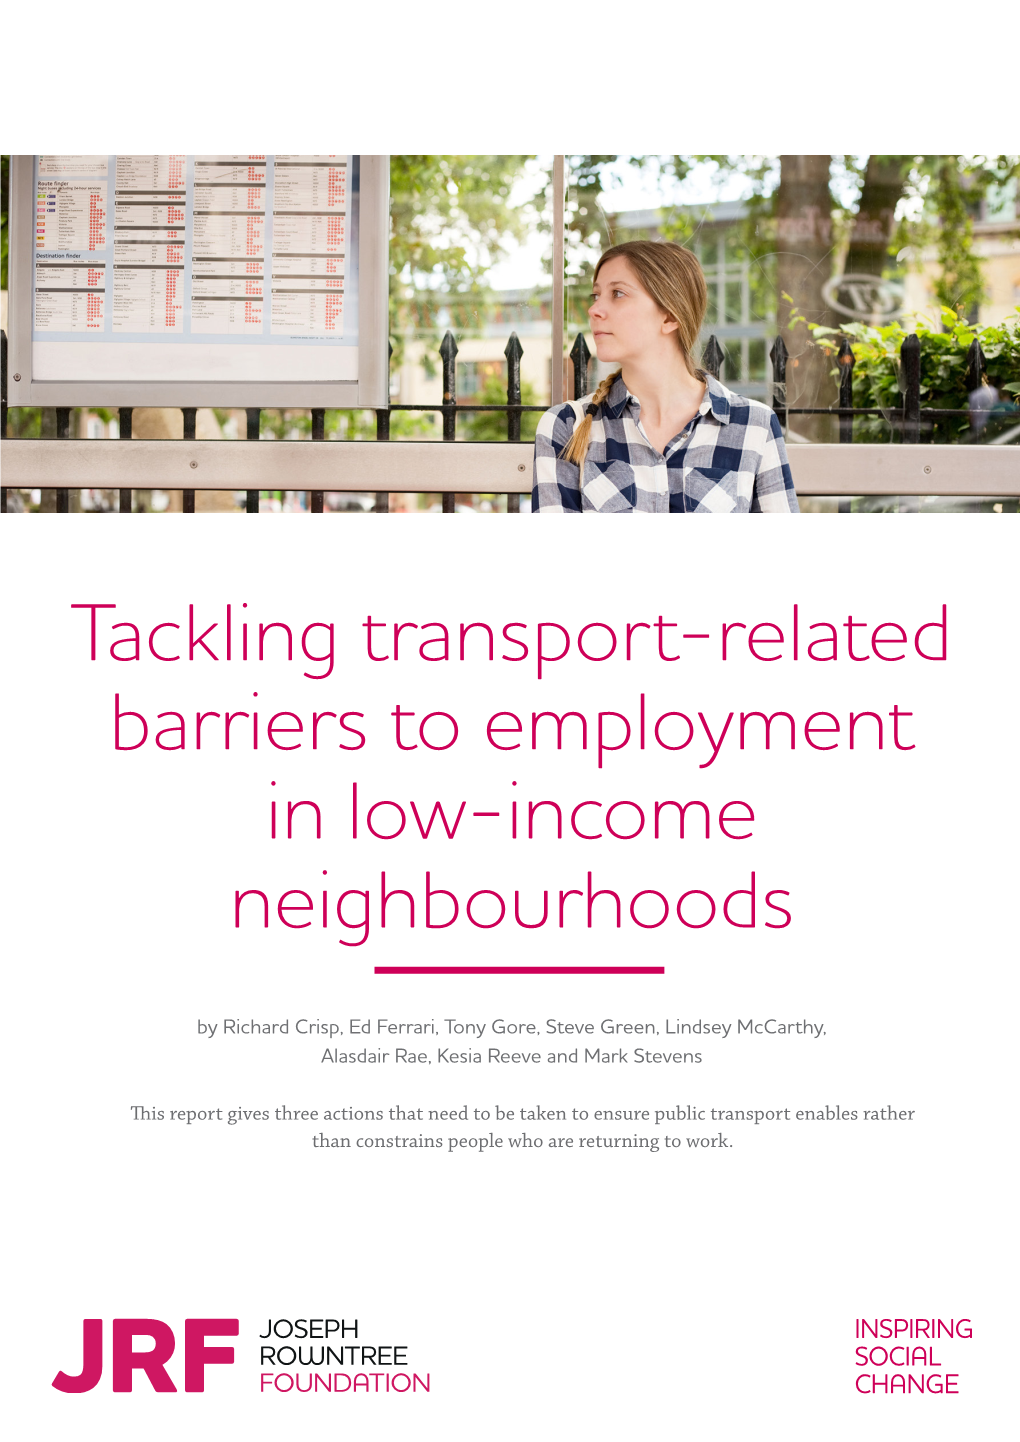 Tackling Transport-Related Barriers to Employment in Low-Income Neighbourhoods